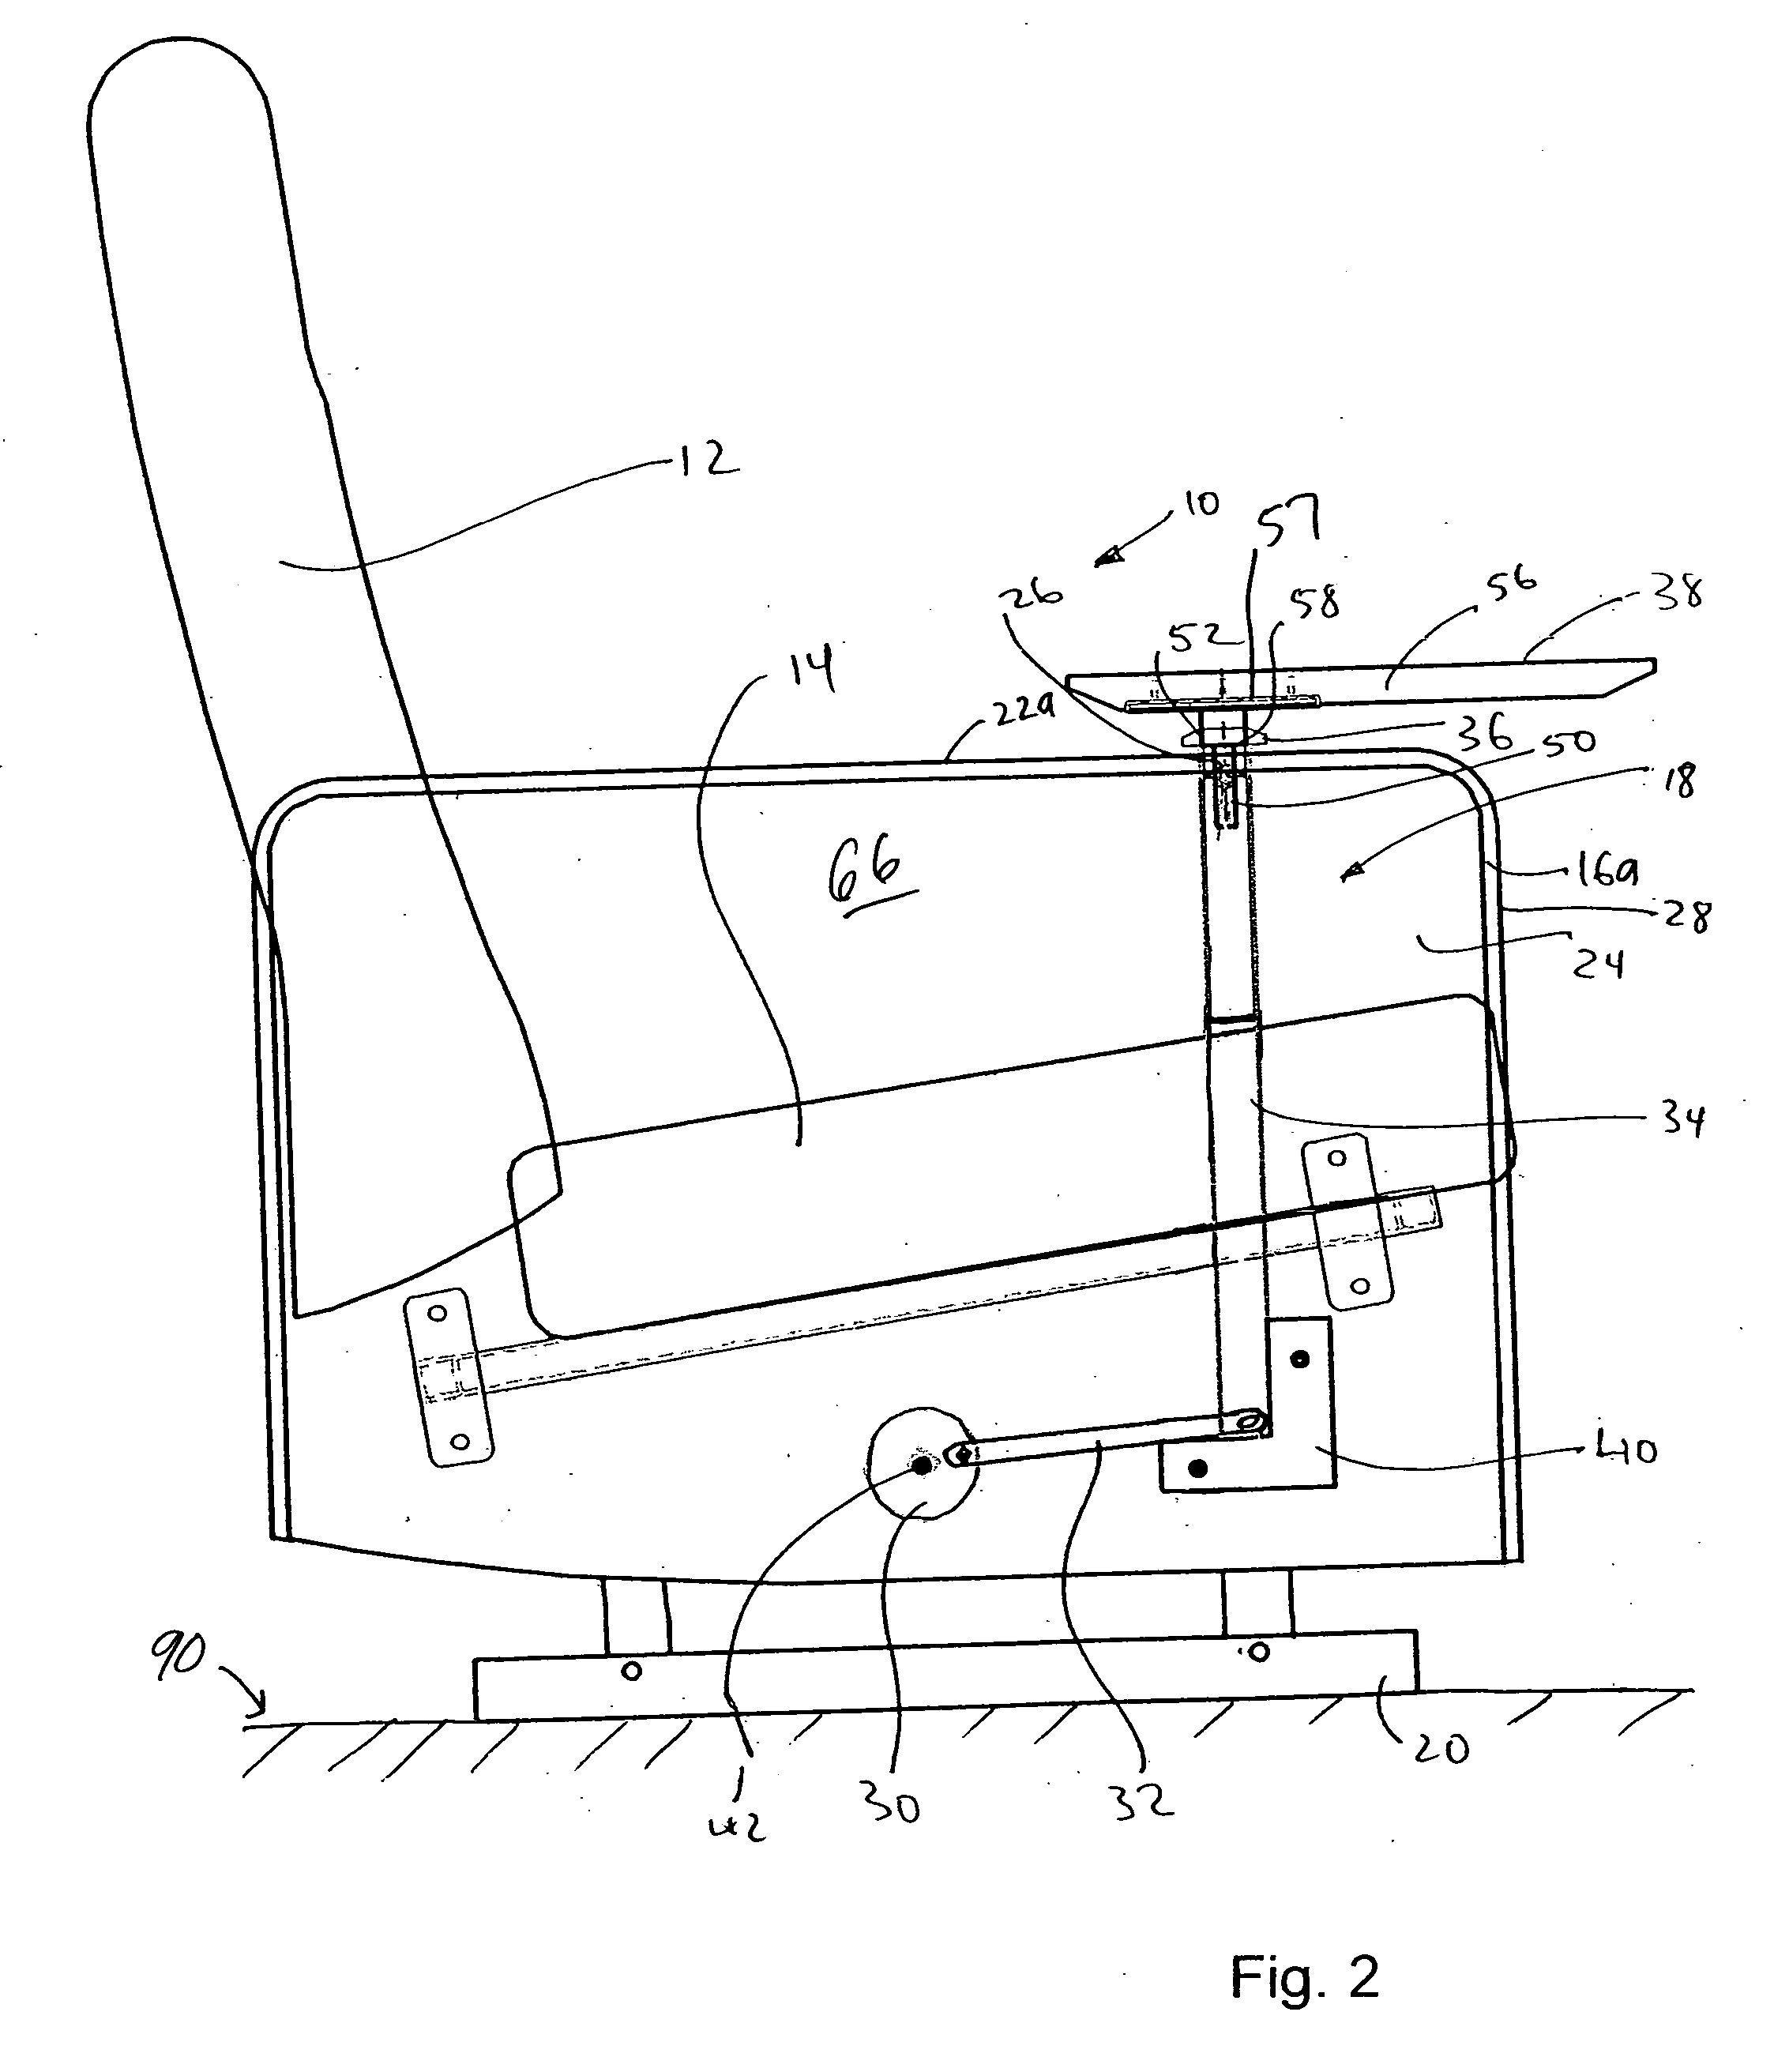 Self-leveling tablet mechanism for a chair